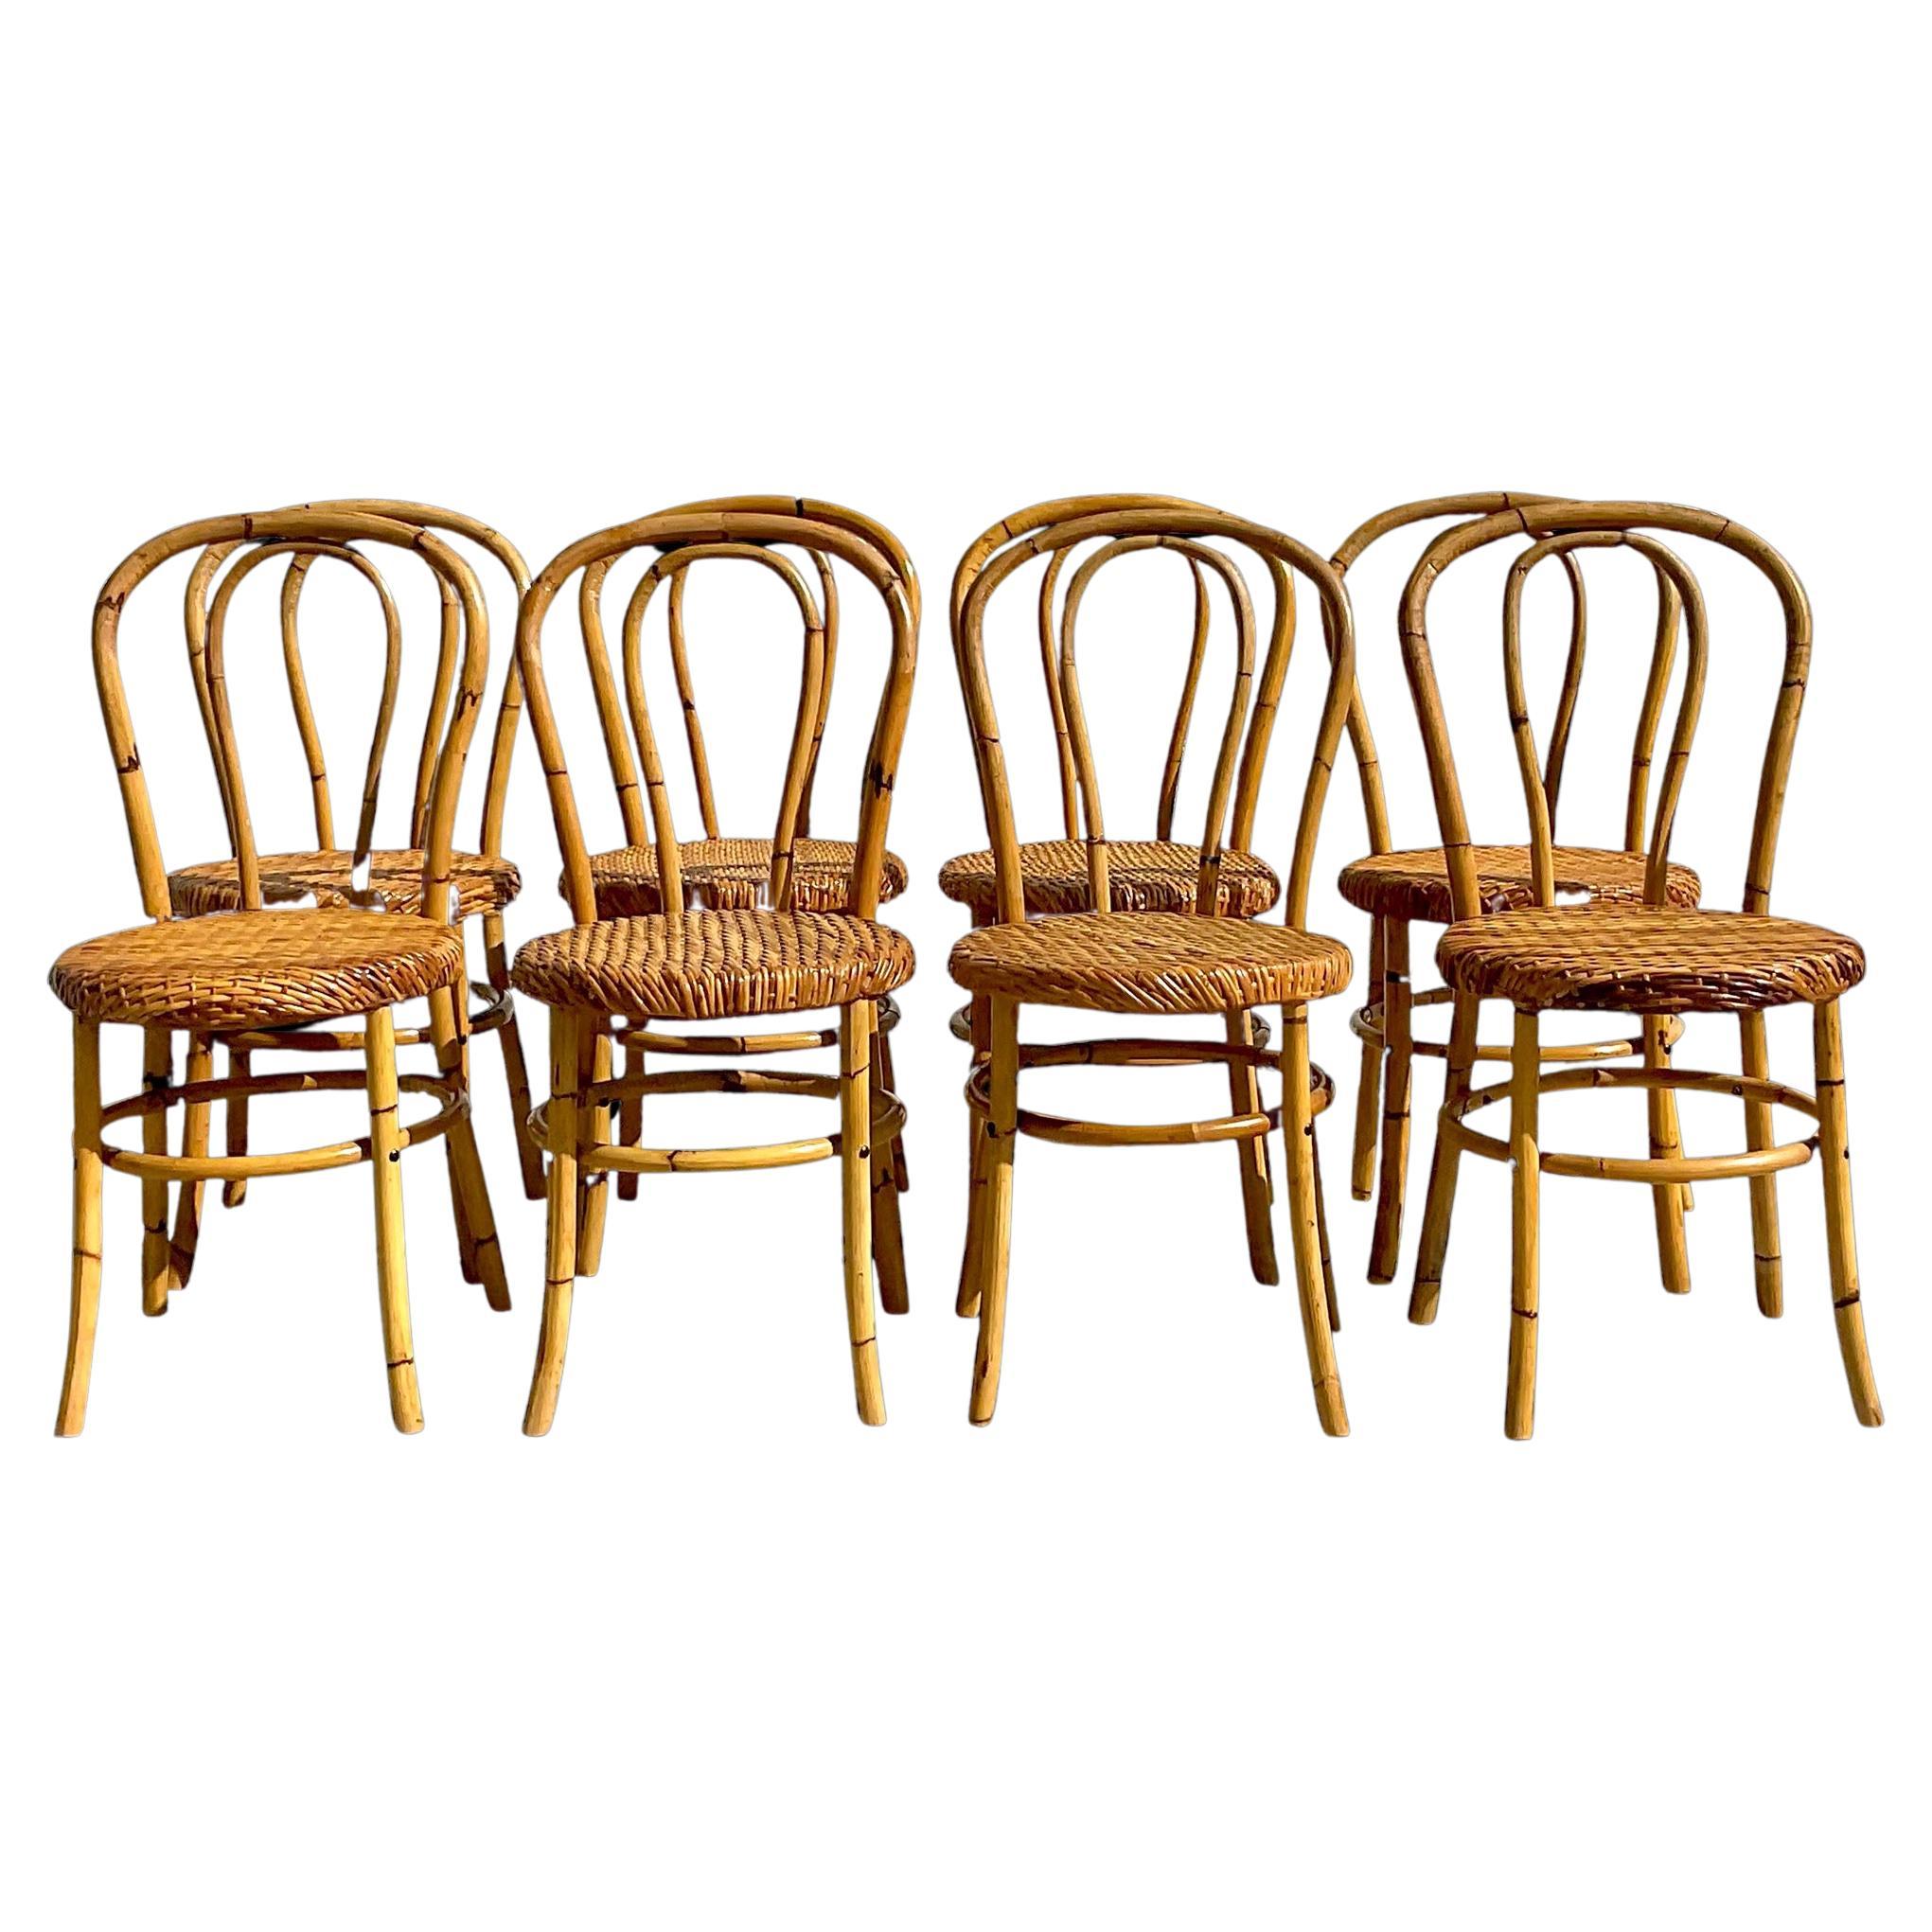 Vintage Coastal Rare McGuire Bent Bamboo Dining Chairs - Set of 8 For Sale